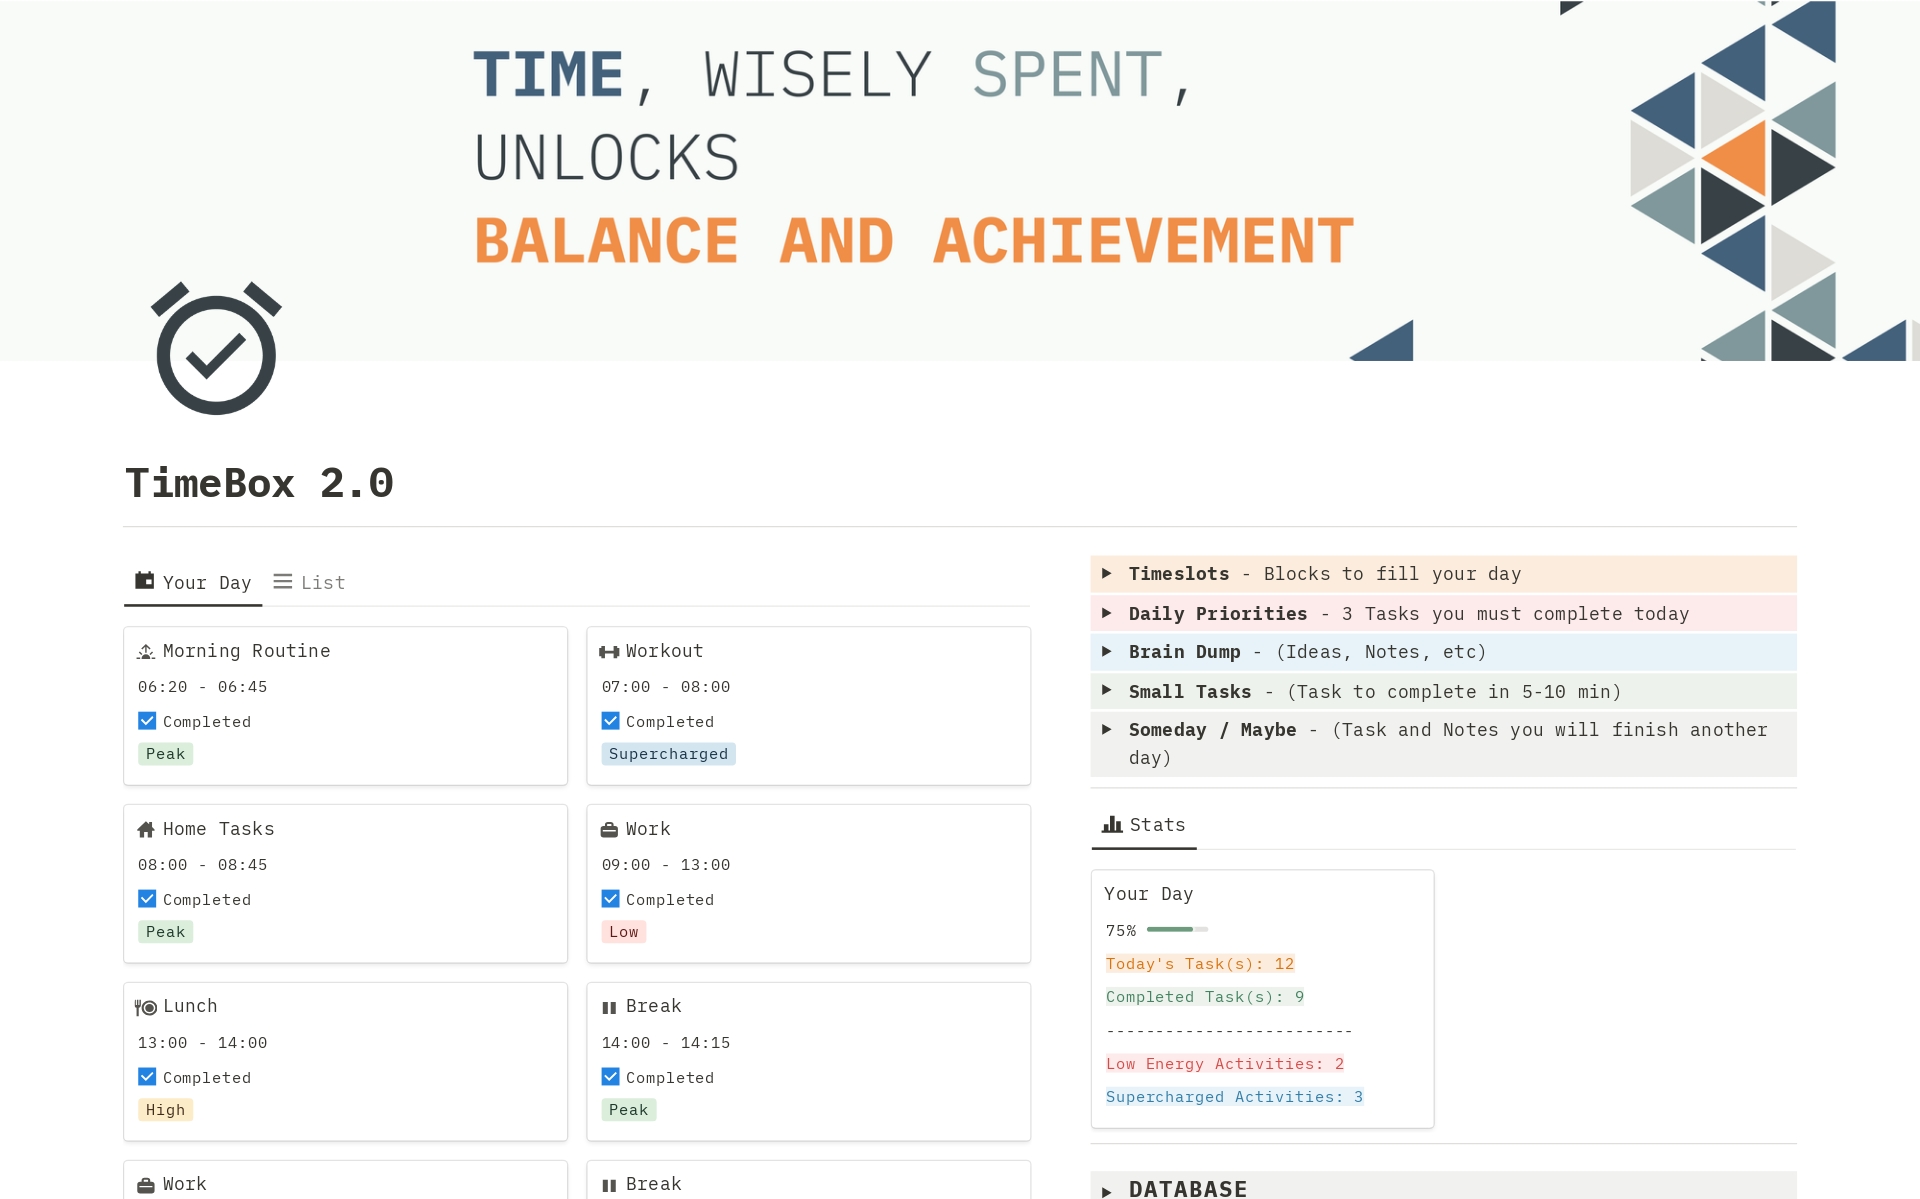 Slay your to-do list & reclaim your time with Timebox 2.0 (Notion).
This powerful template helps you conquer tasks with laser focus, say goodbye to procrastination, and finally achieve that elusive work-life balance.   Get started crushing goals today!